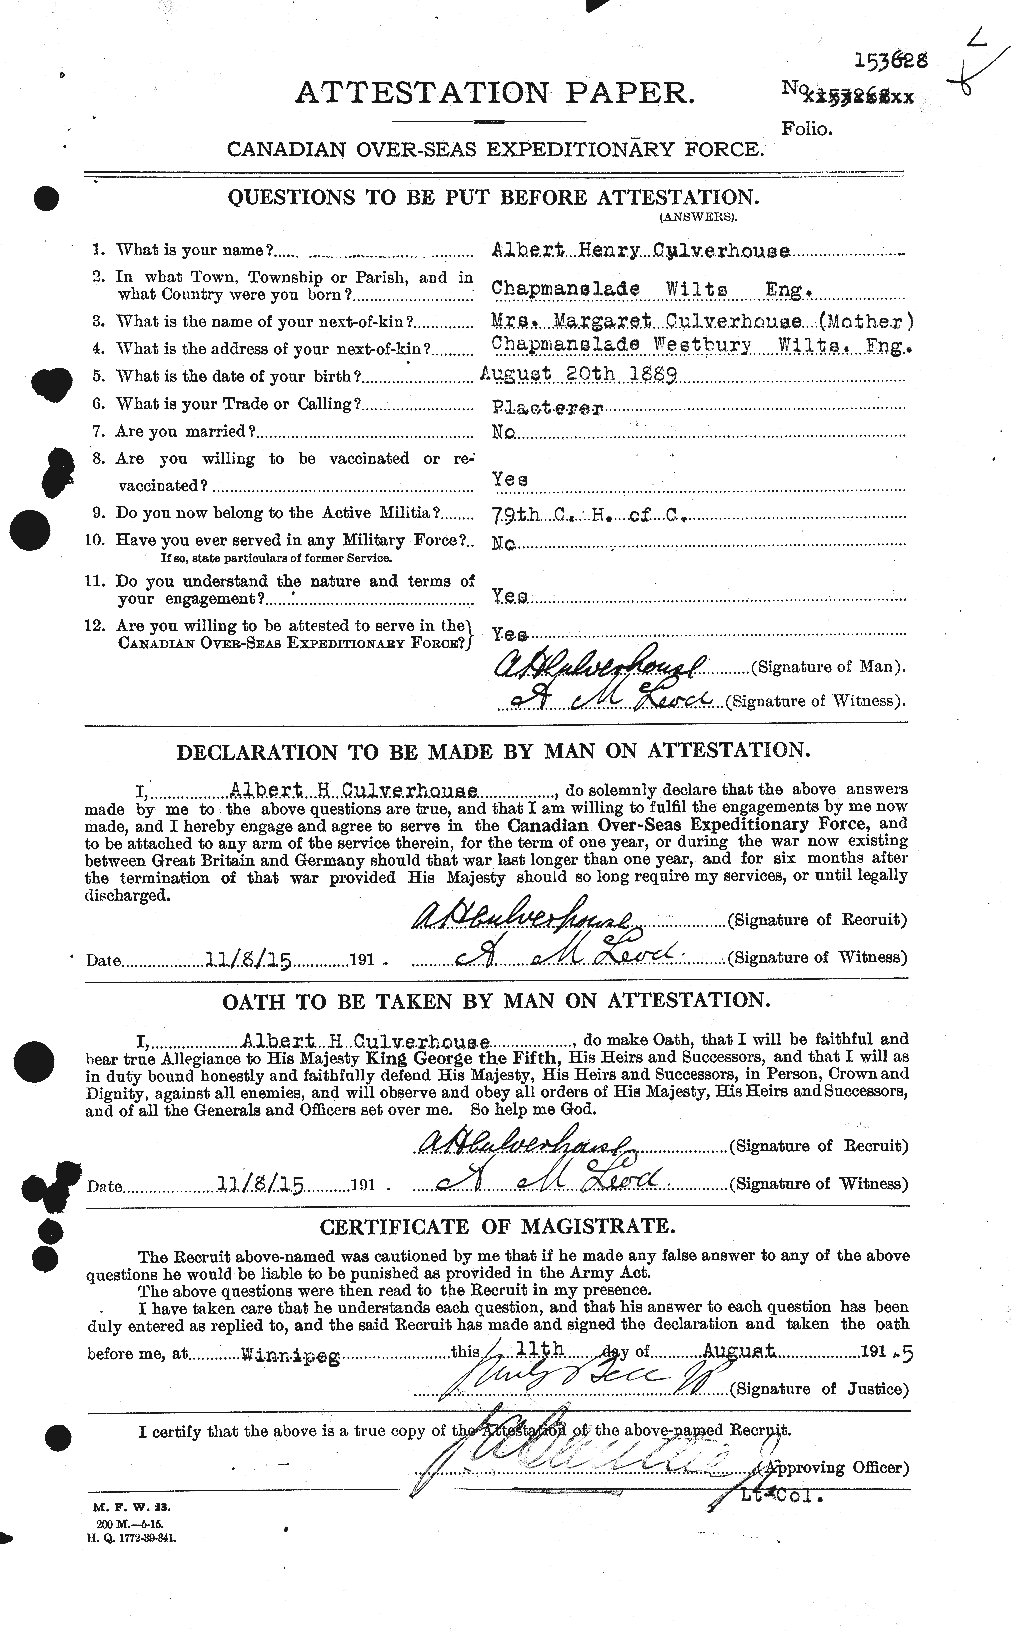 Personnel Records of the First World War - CEF 071541a